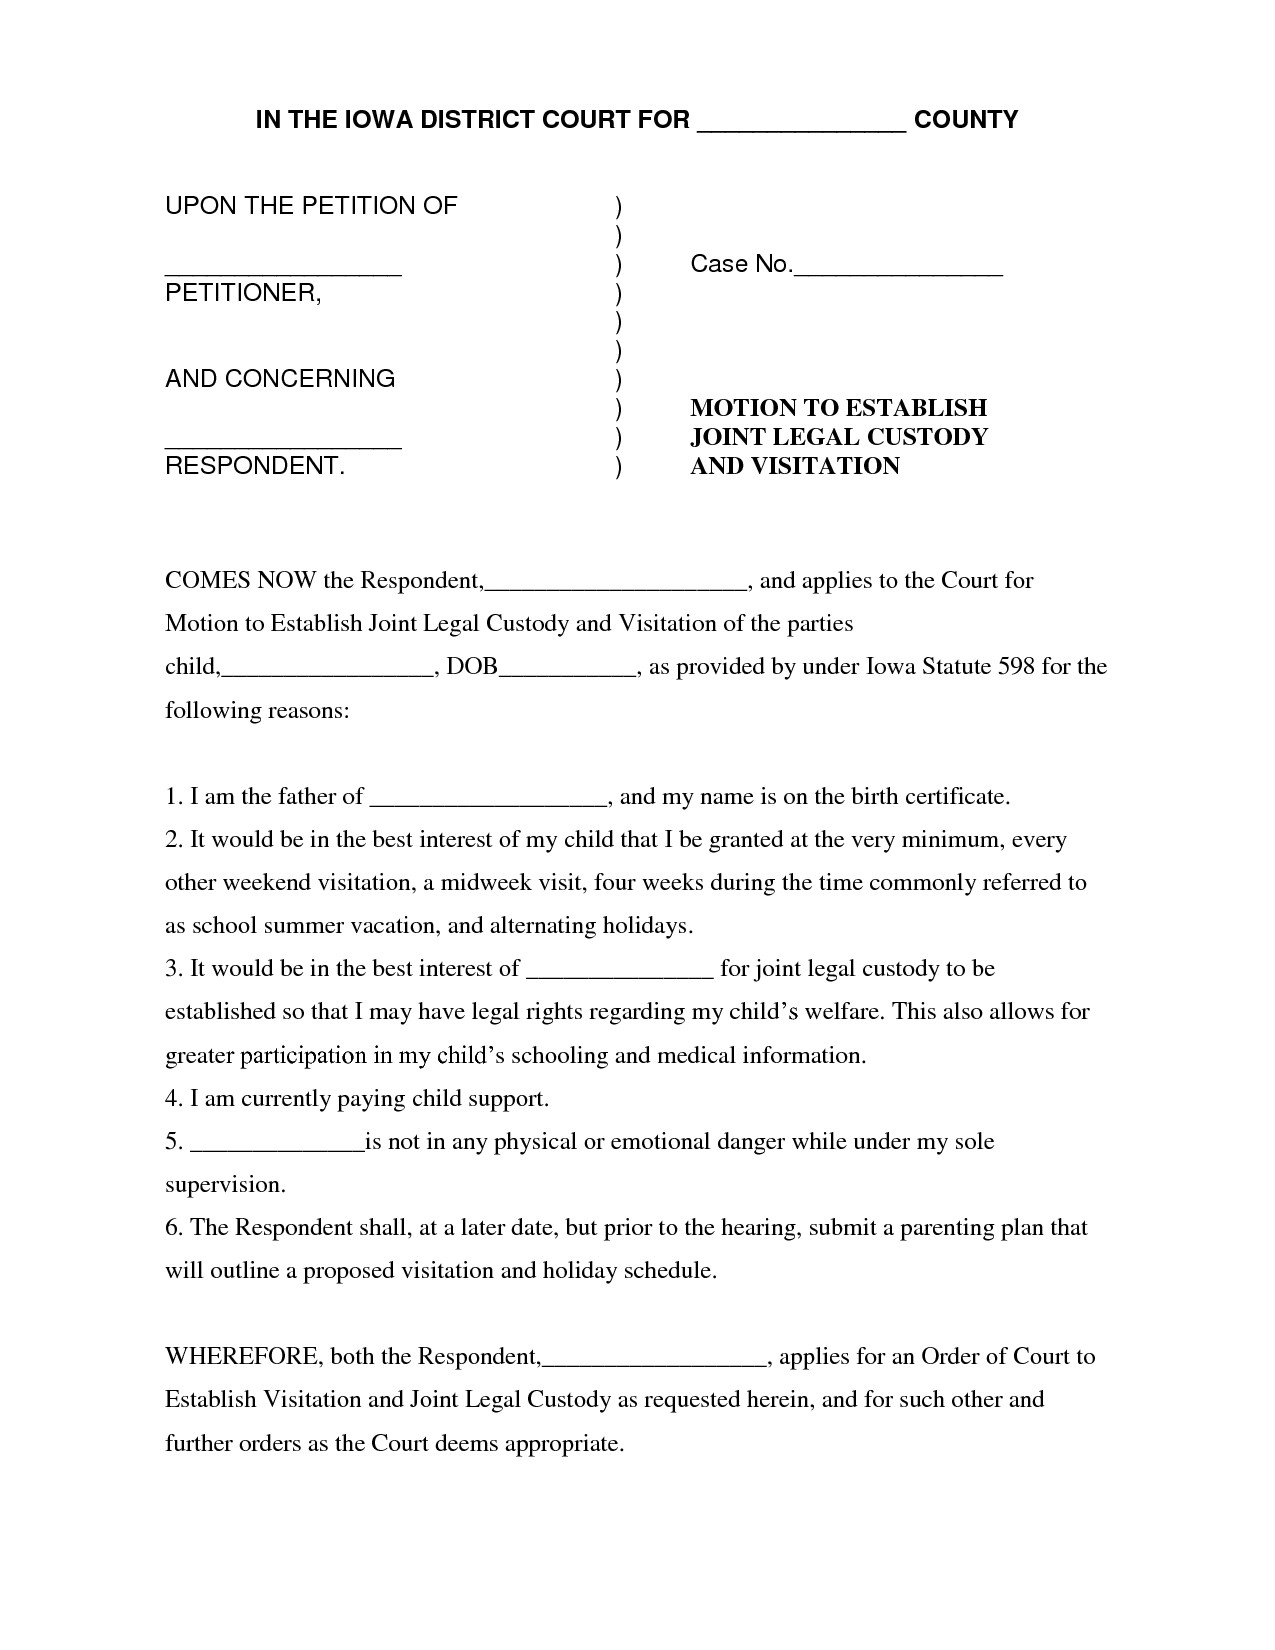 Child Custody Letter Template Best S Of Sample Motions Sample Of Motion to